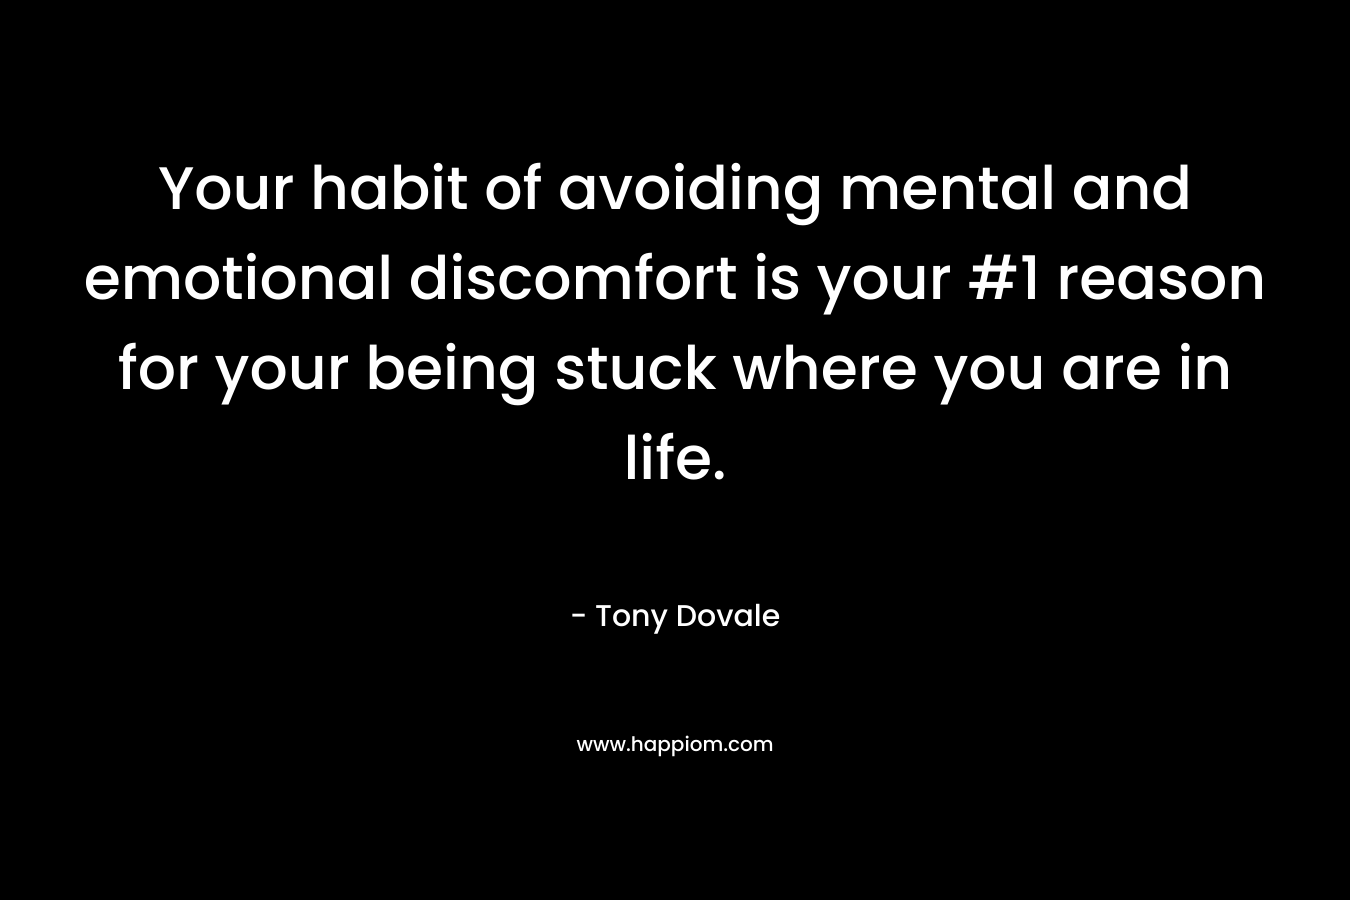 Your habit of avoiding mental and emotional discomfort is your #1 reason for your being stuck where you are in life. – Tony Dovale